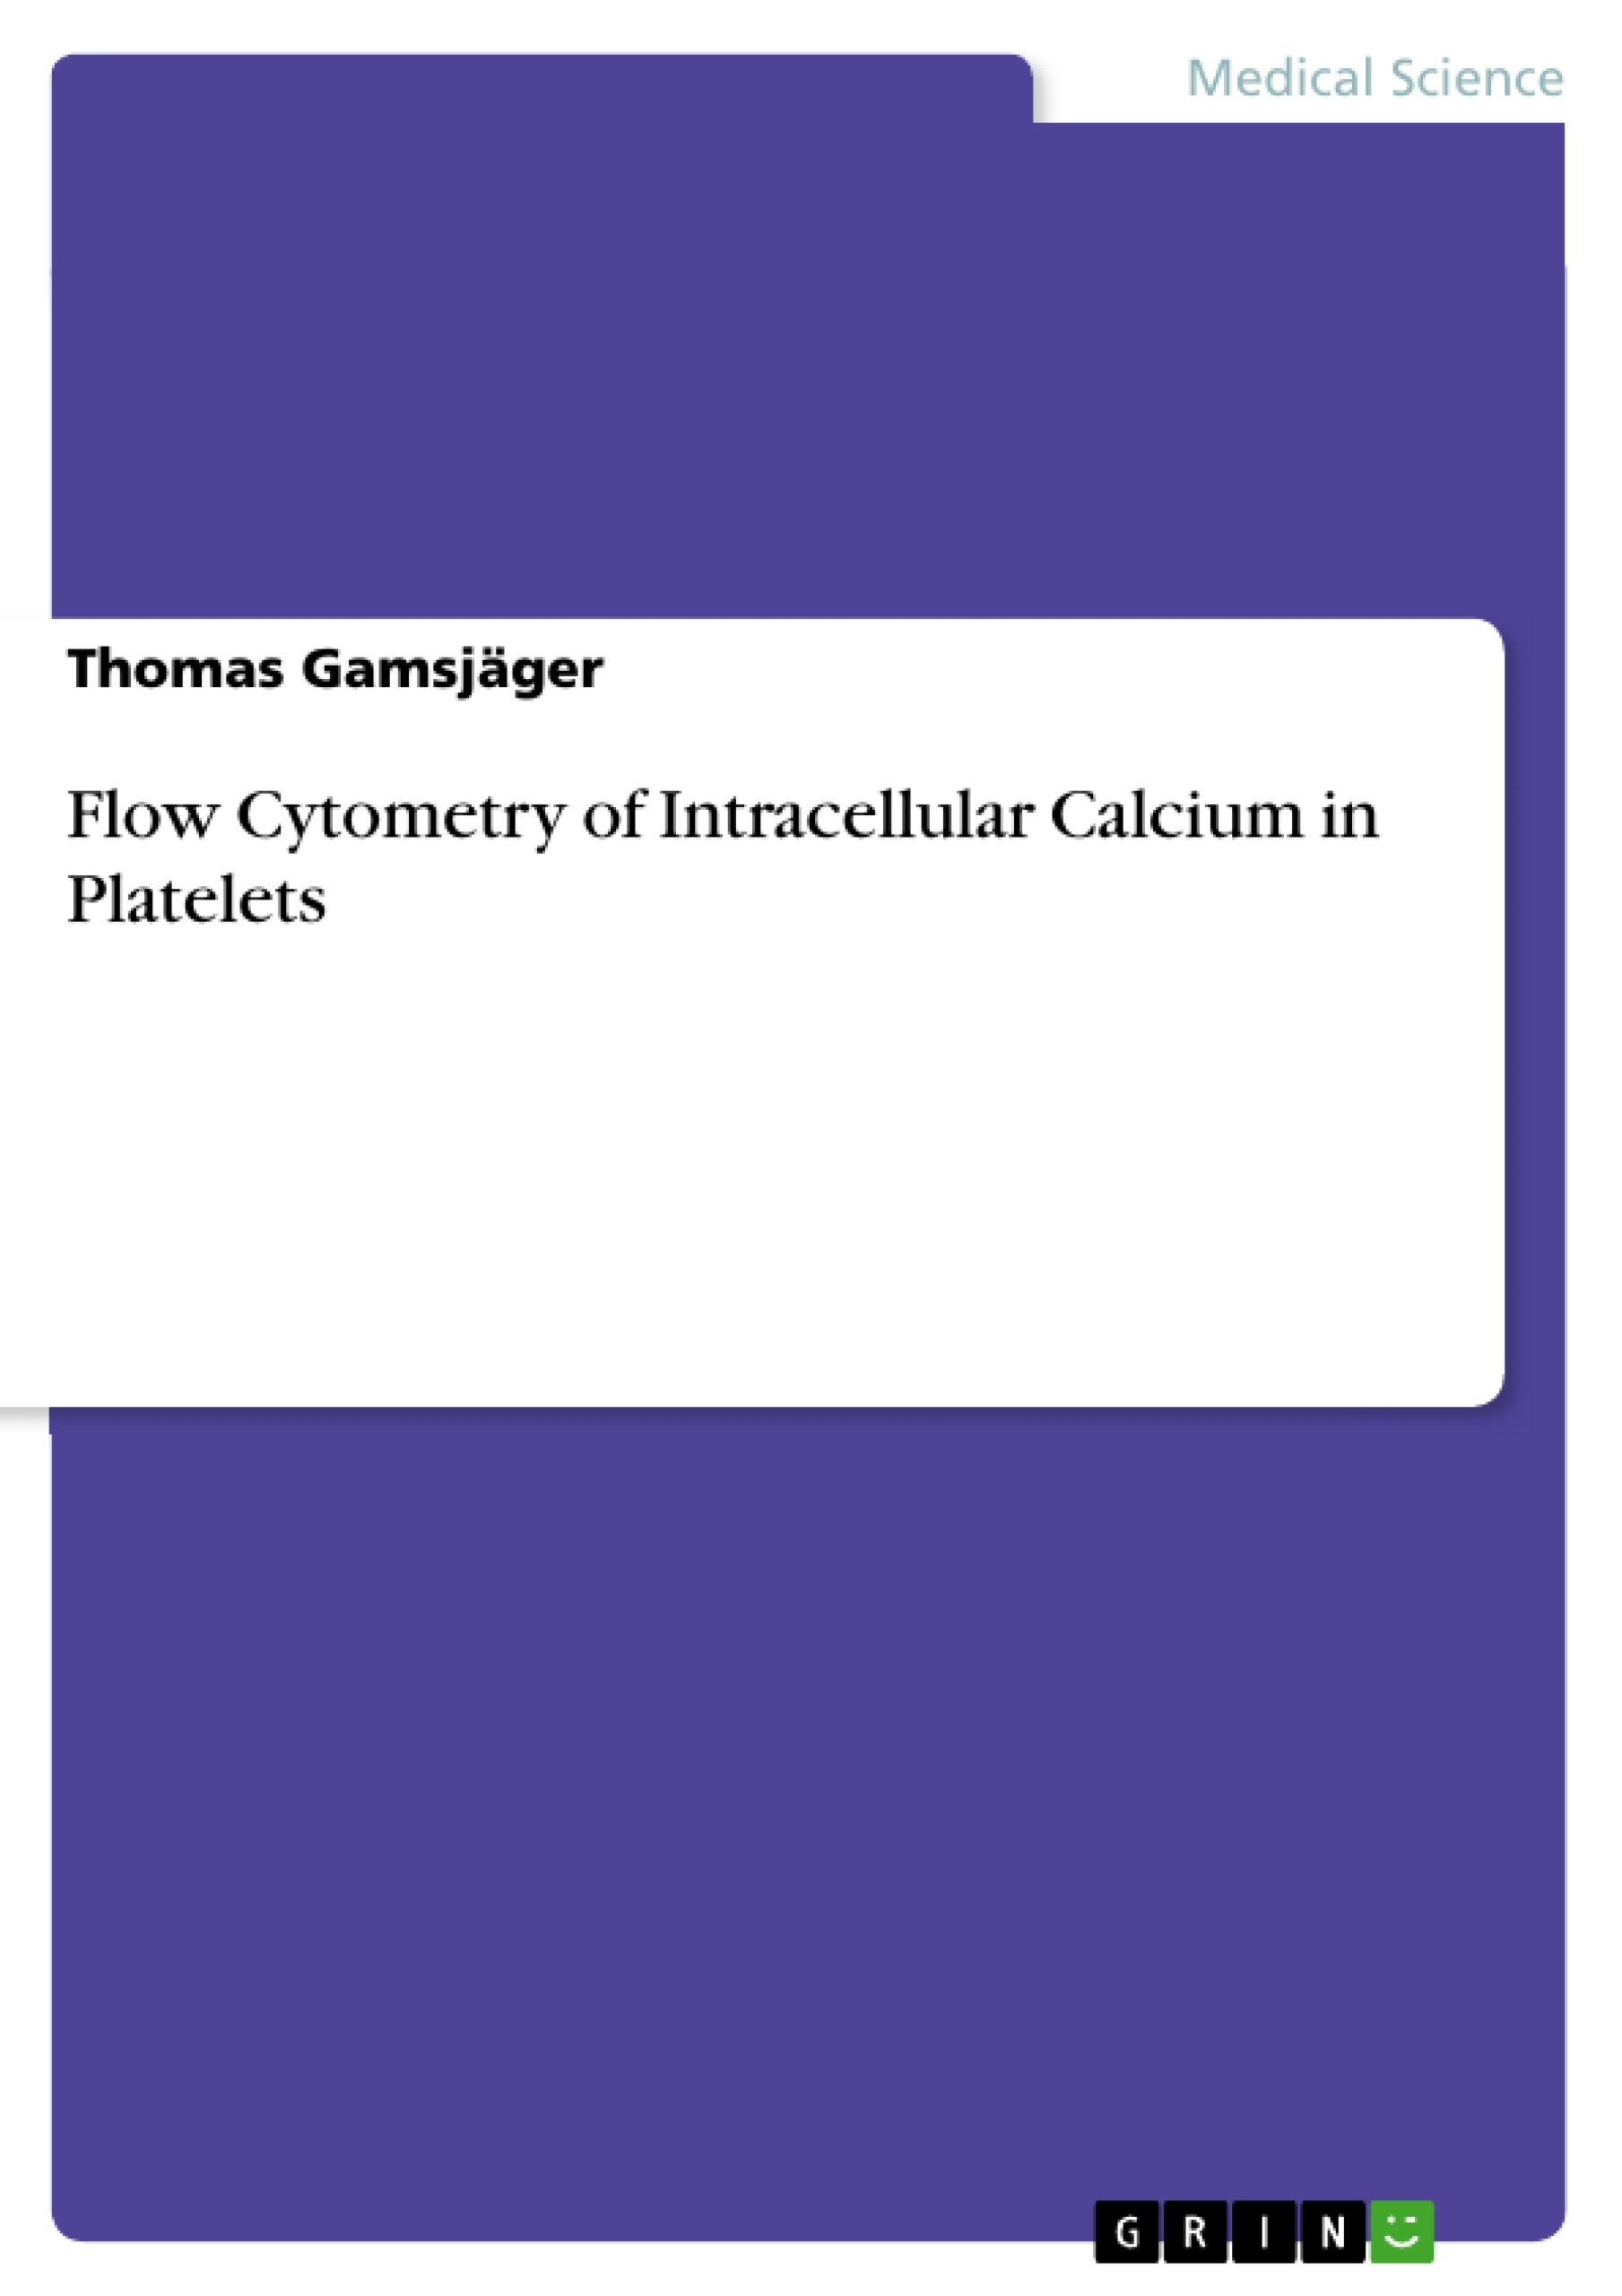 Titre: Flow Cytometry of Intracellular Calcium in Platelets